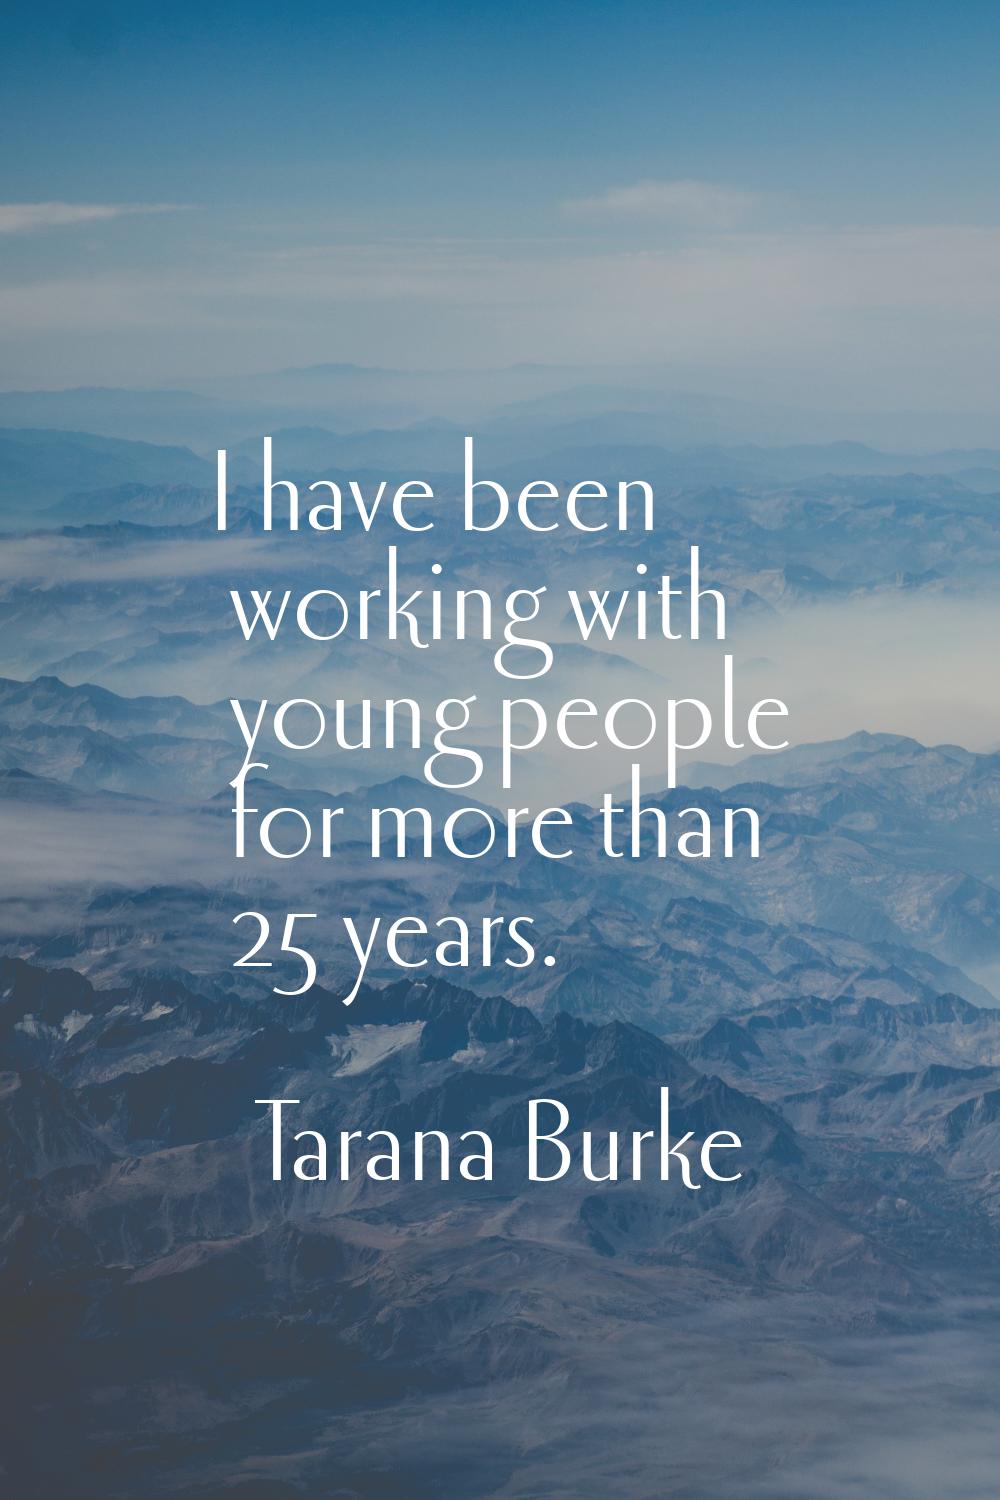 I have been working with young people for more than 25 years.